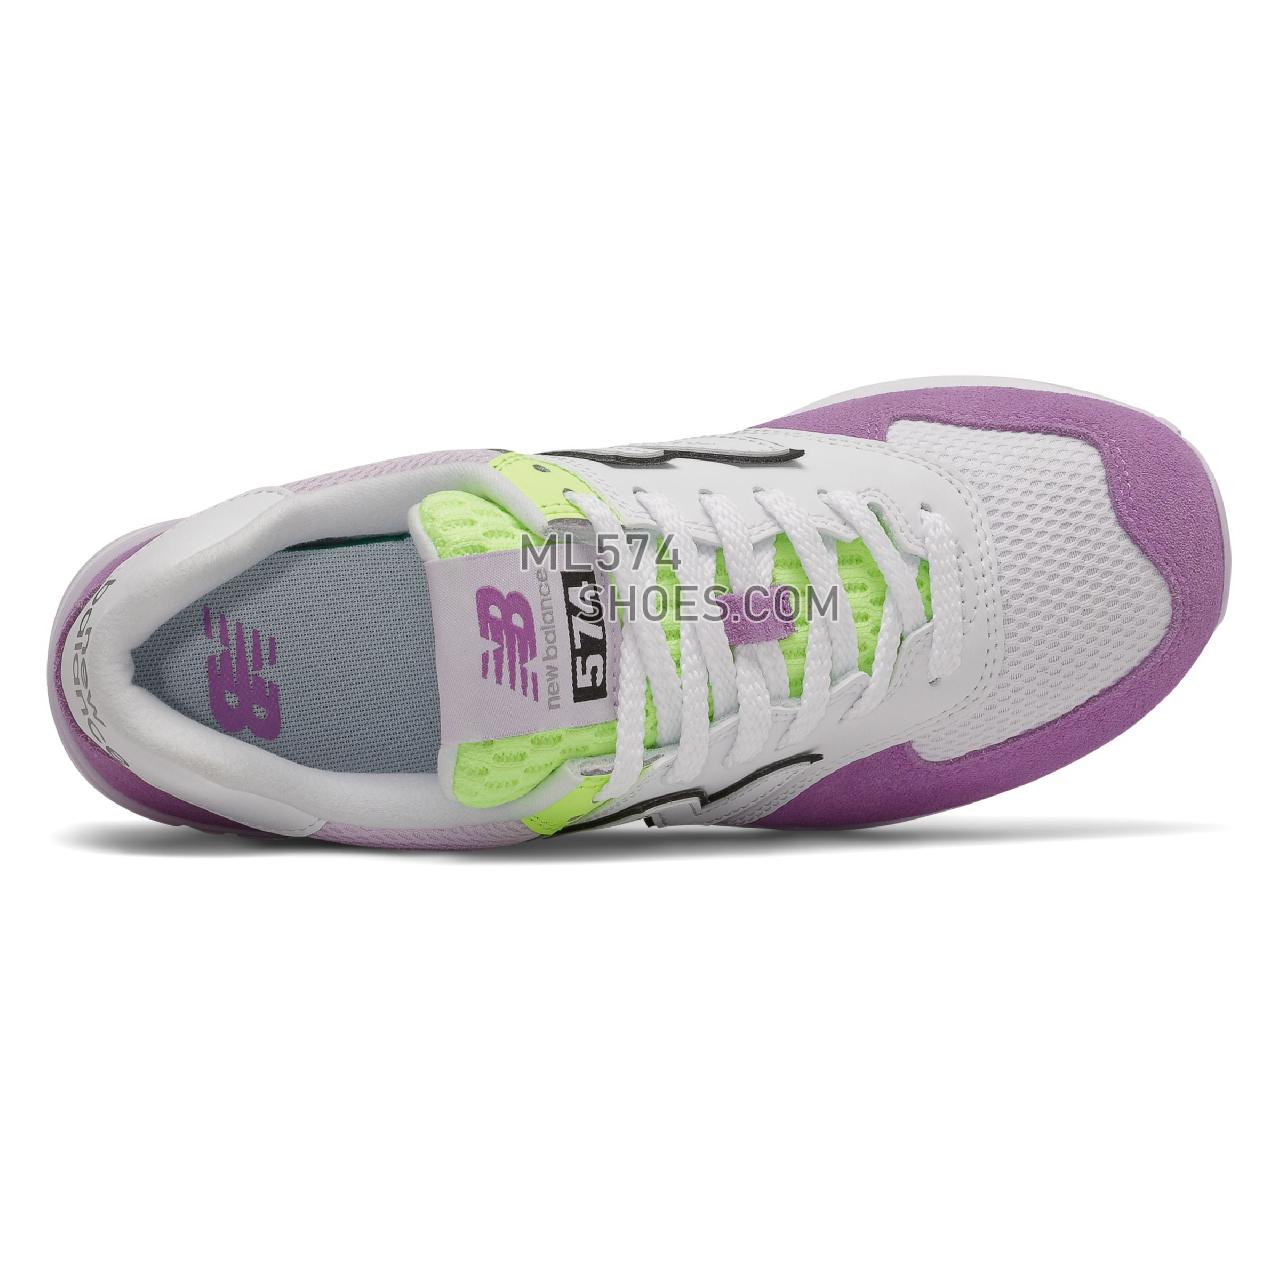 New Balance 574 - Women's Classic Sneakers - Heliotrope with Bleached Lime Glo - WL574GY2